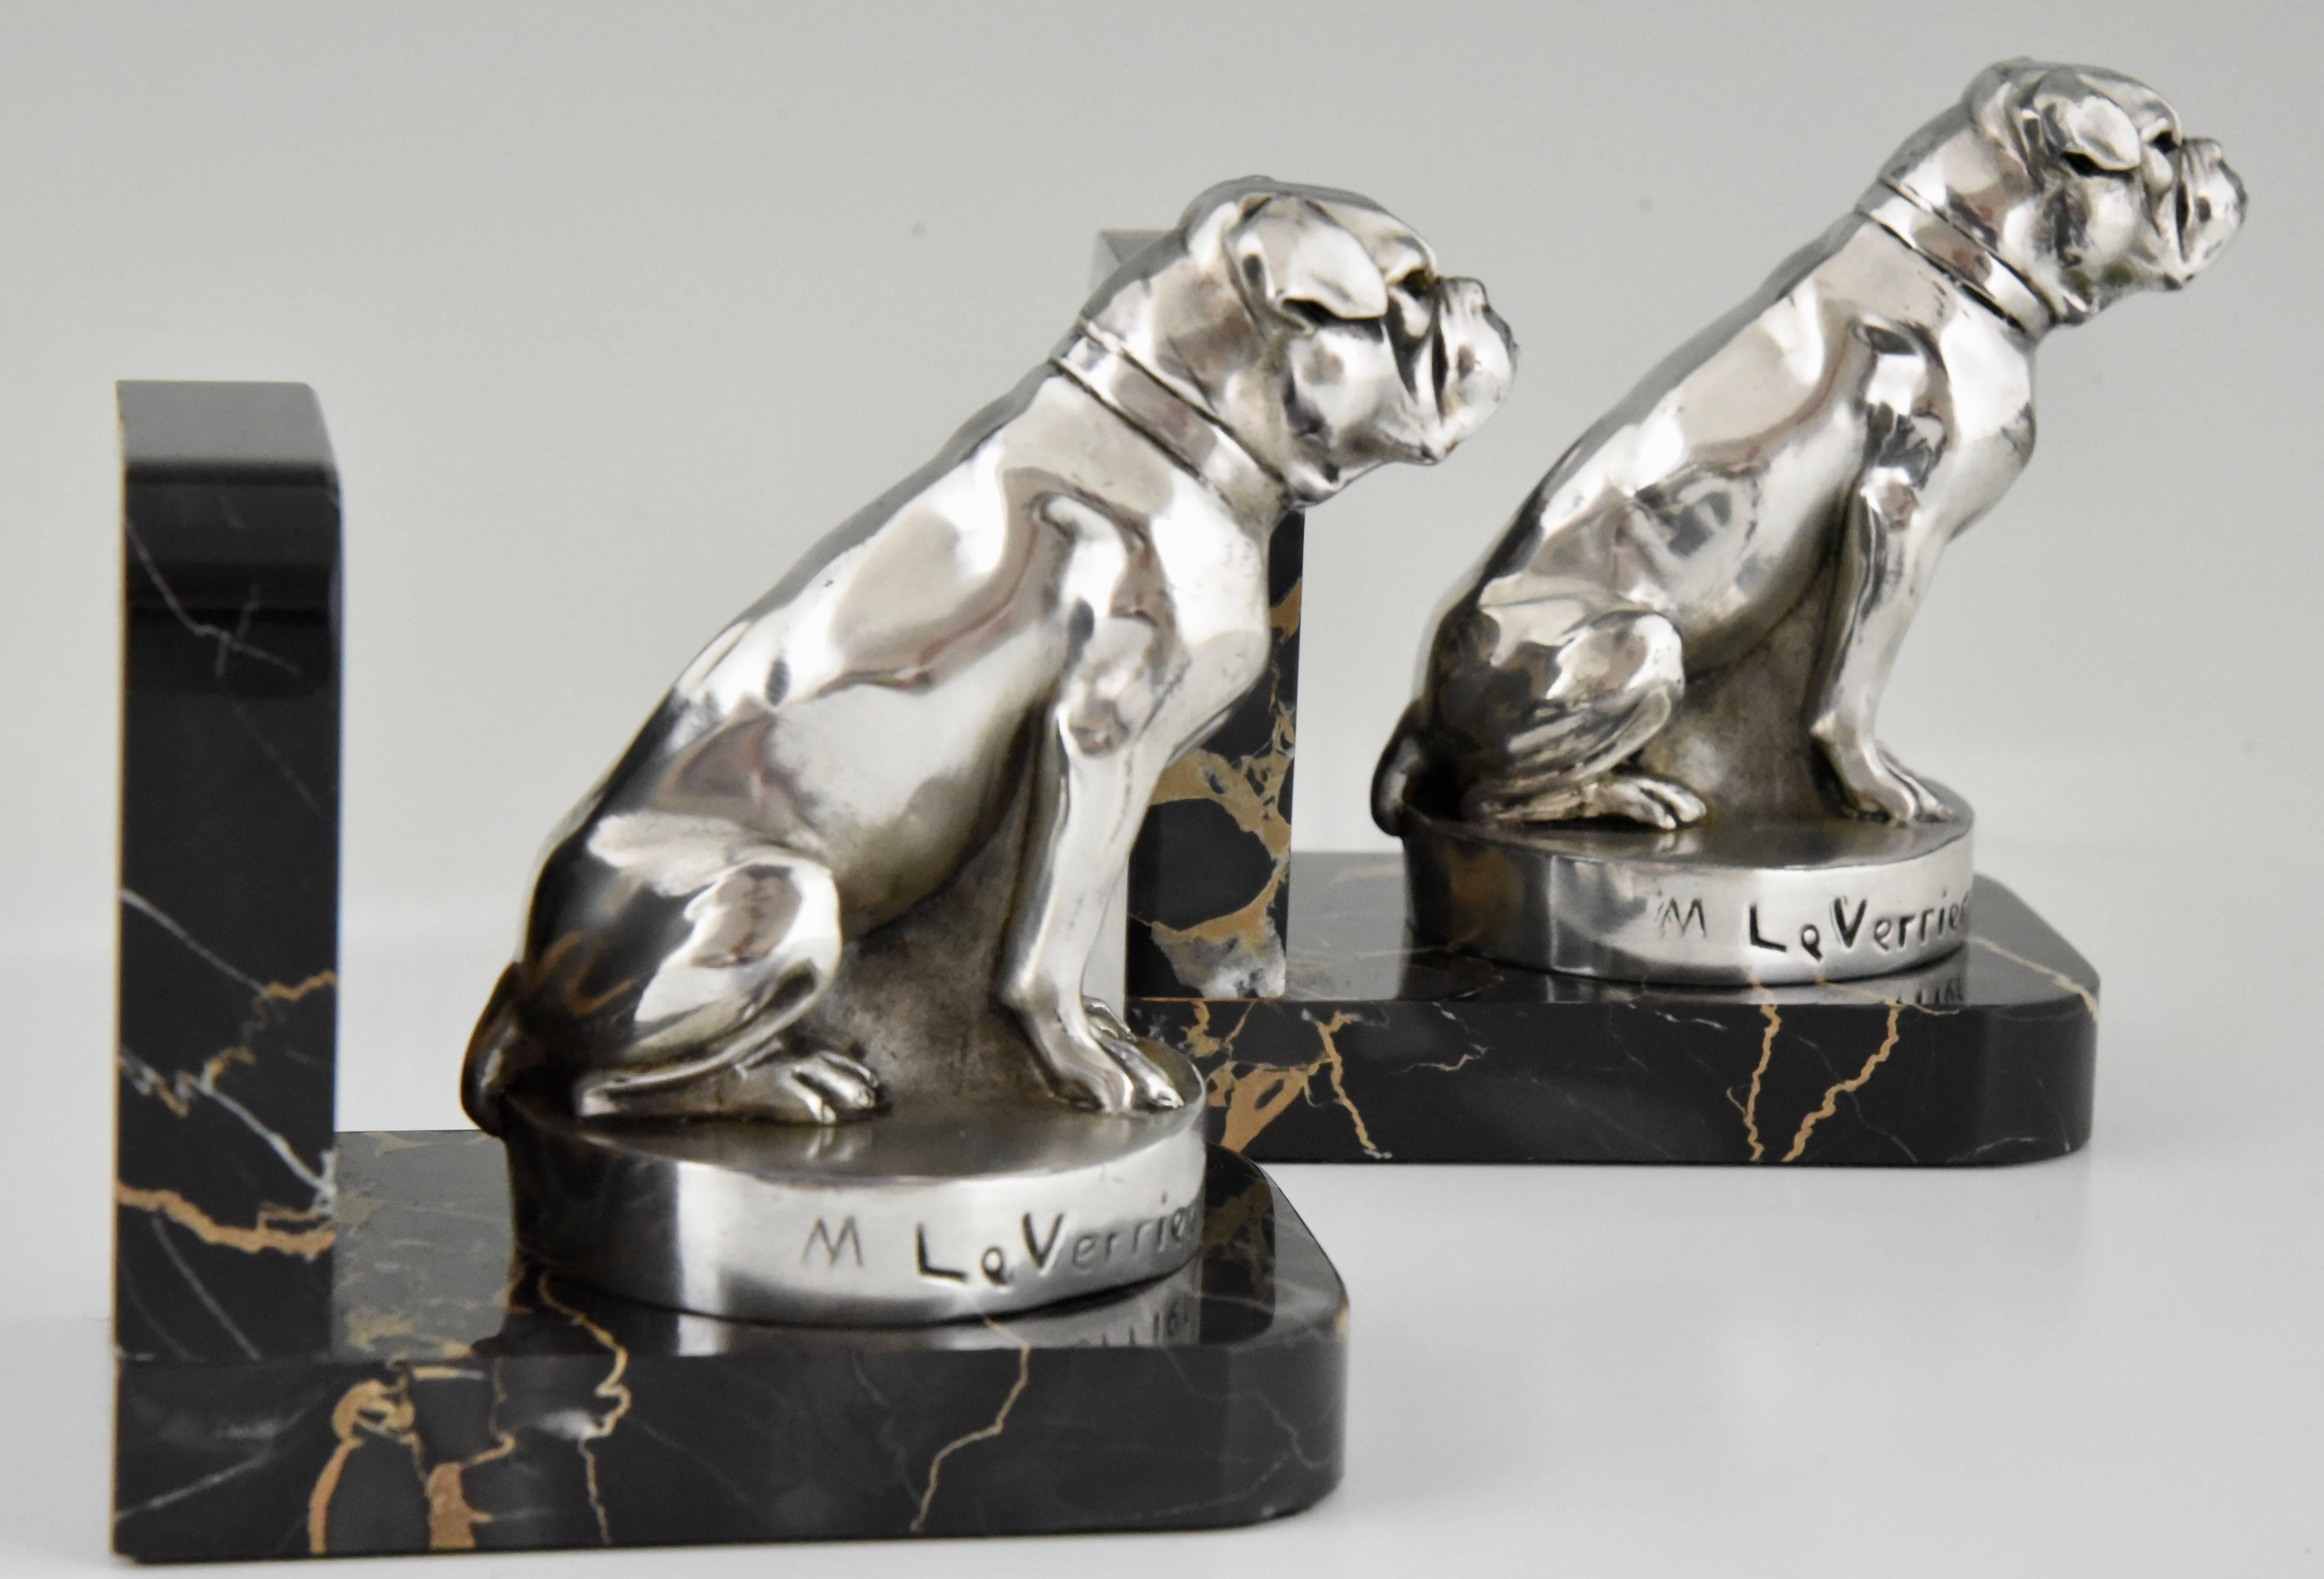 20th Century French Art Deco Bulldog Bookends by Max Le Verrier on Marble Base, 1930